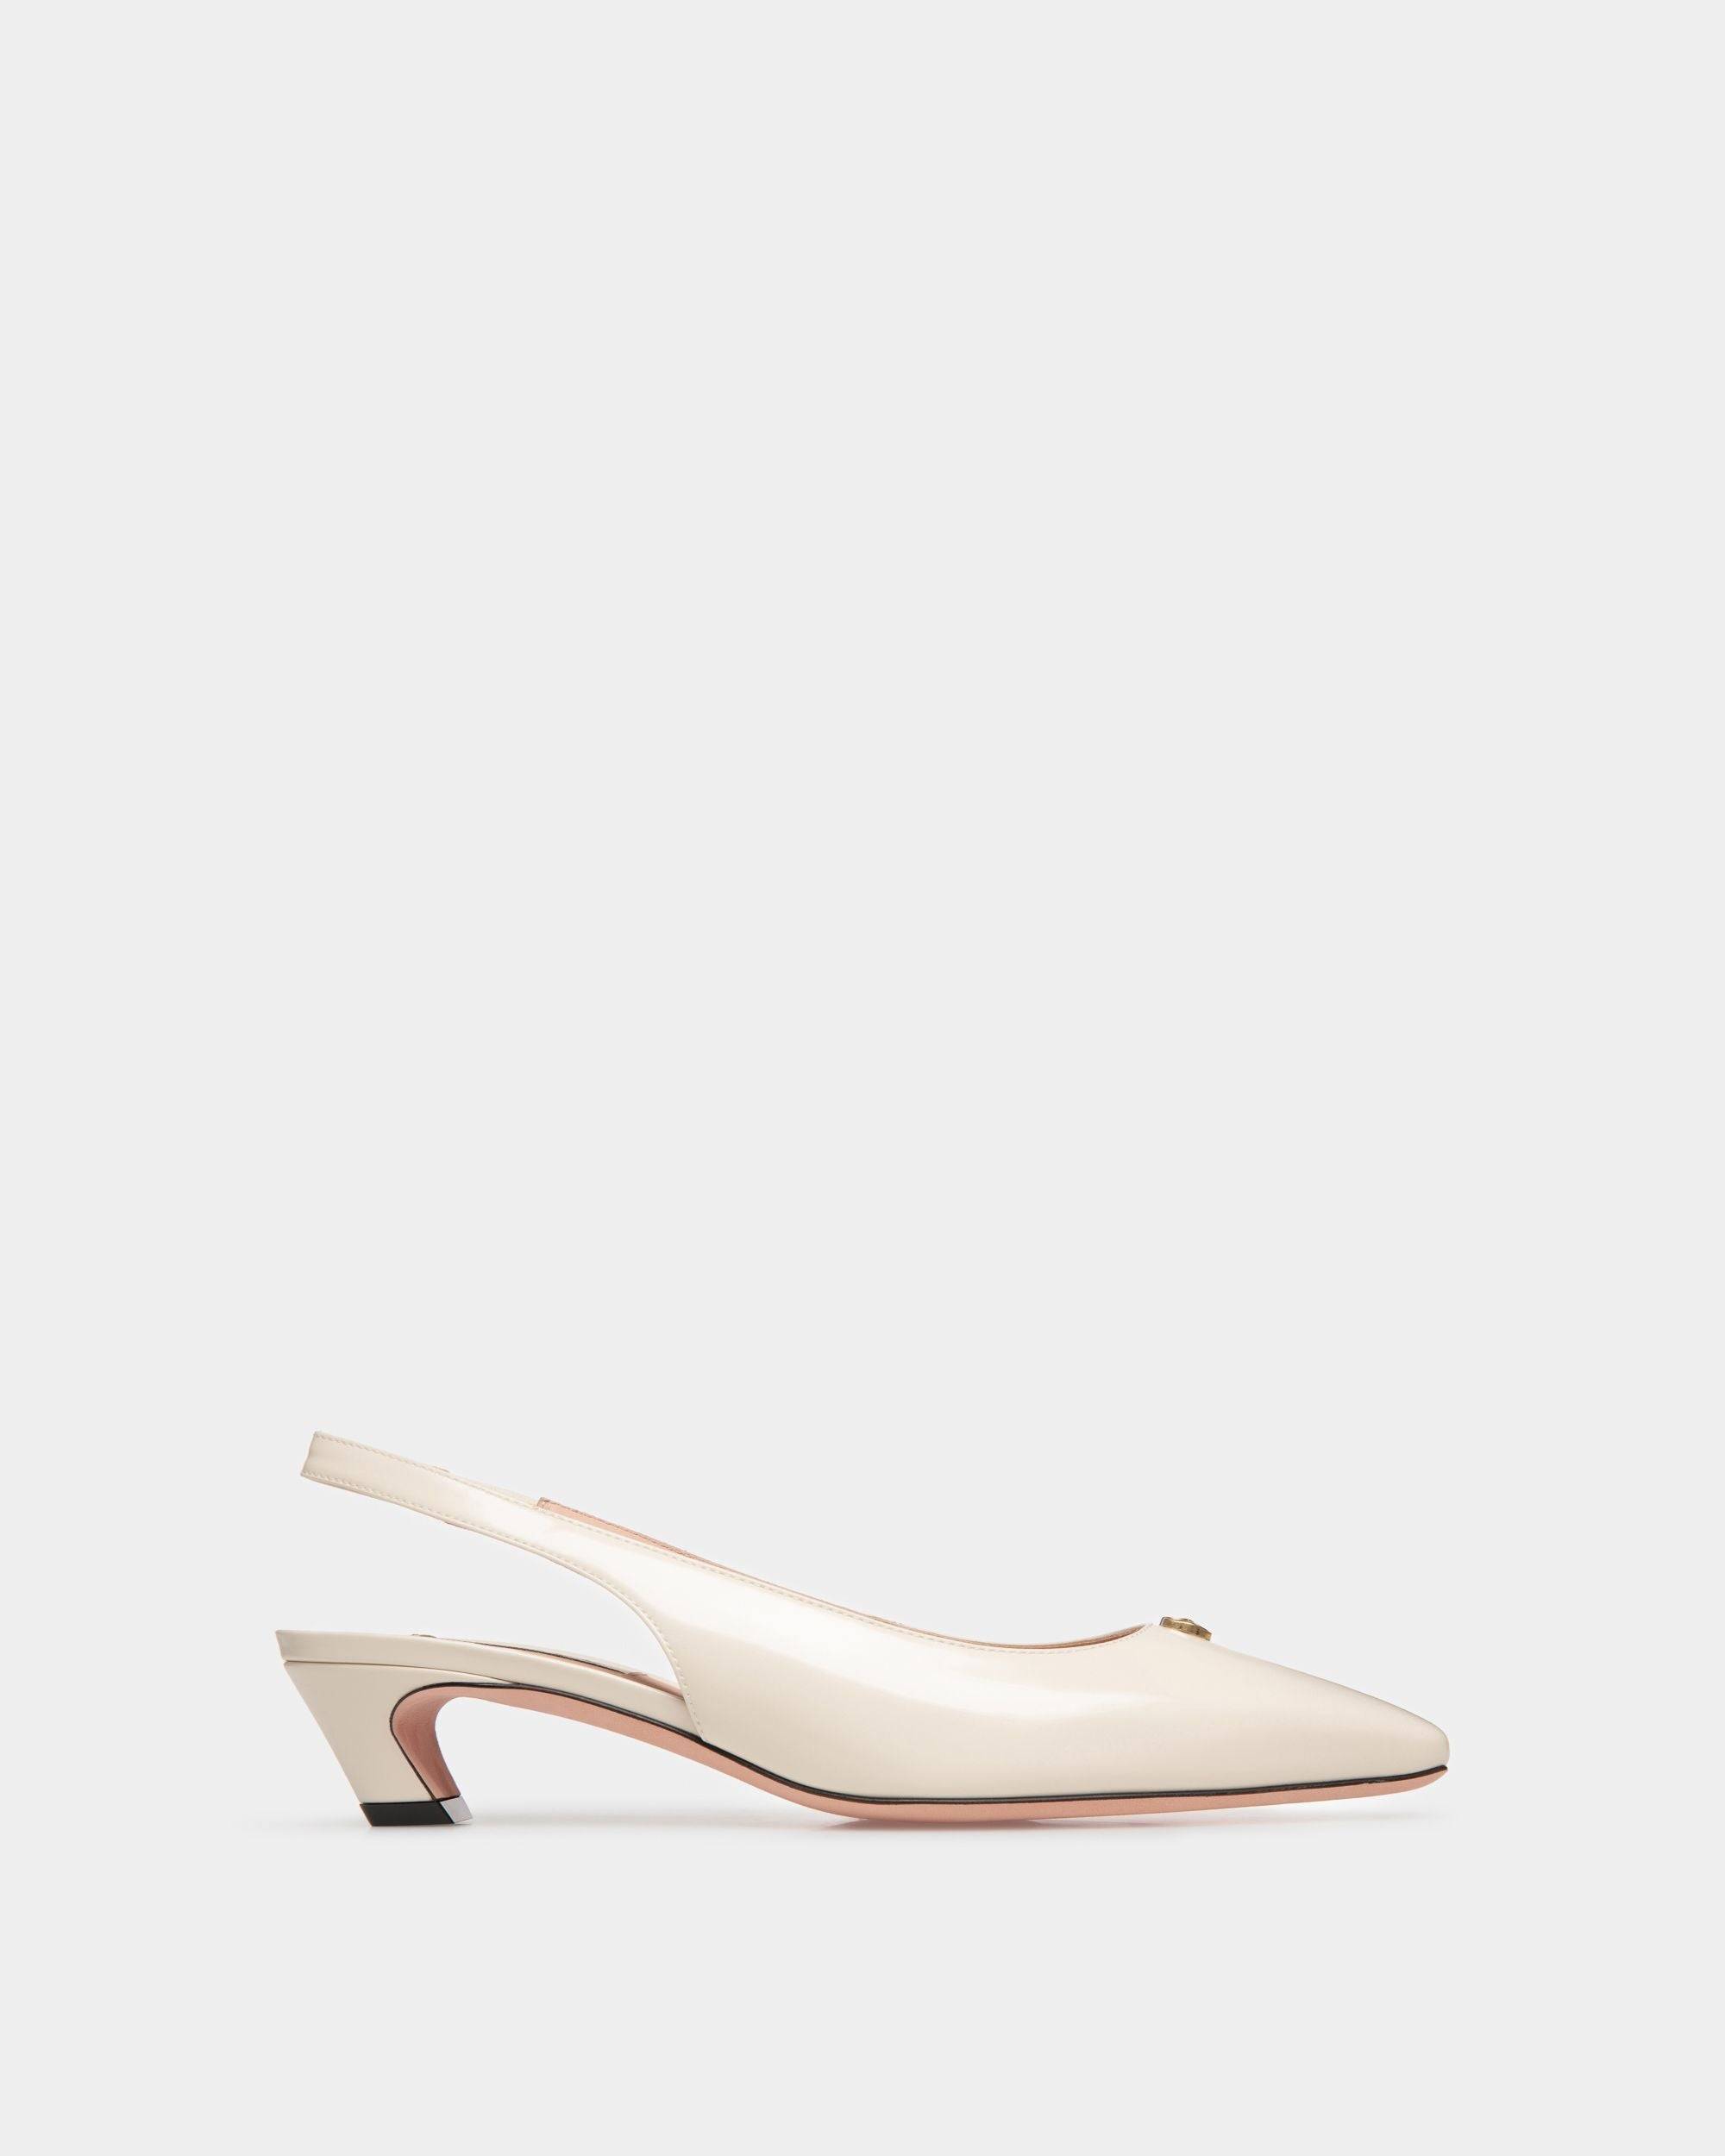 Sylt | Women's Slingback Pump in White Leather | Bally | Still Life Side